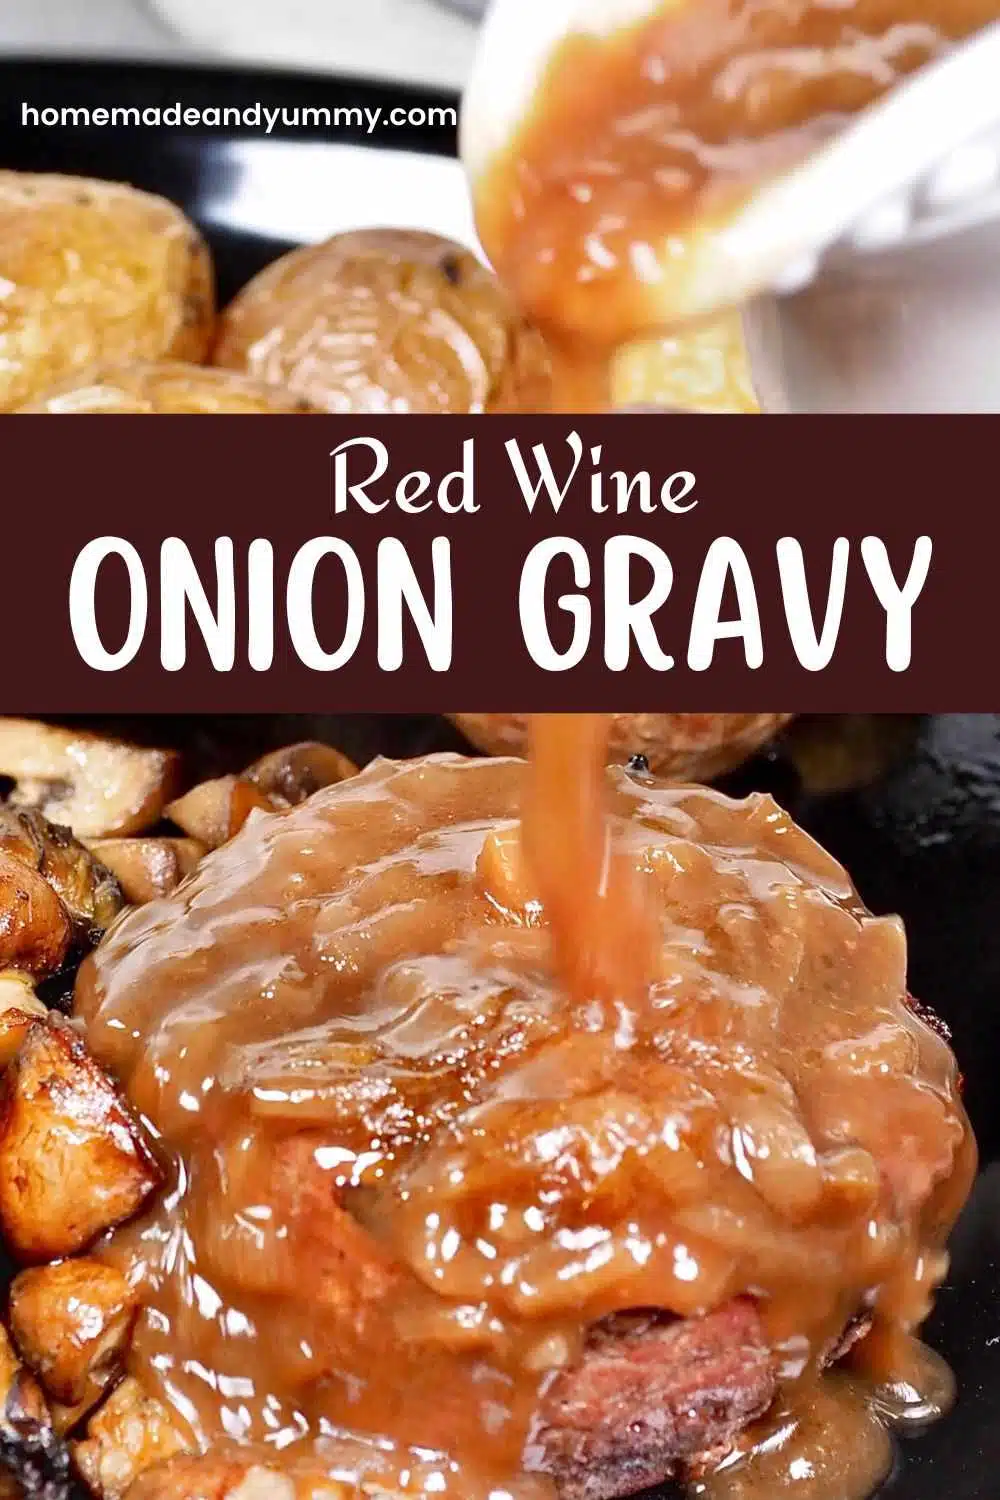 Red wine and onion gravy on top of steak.